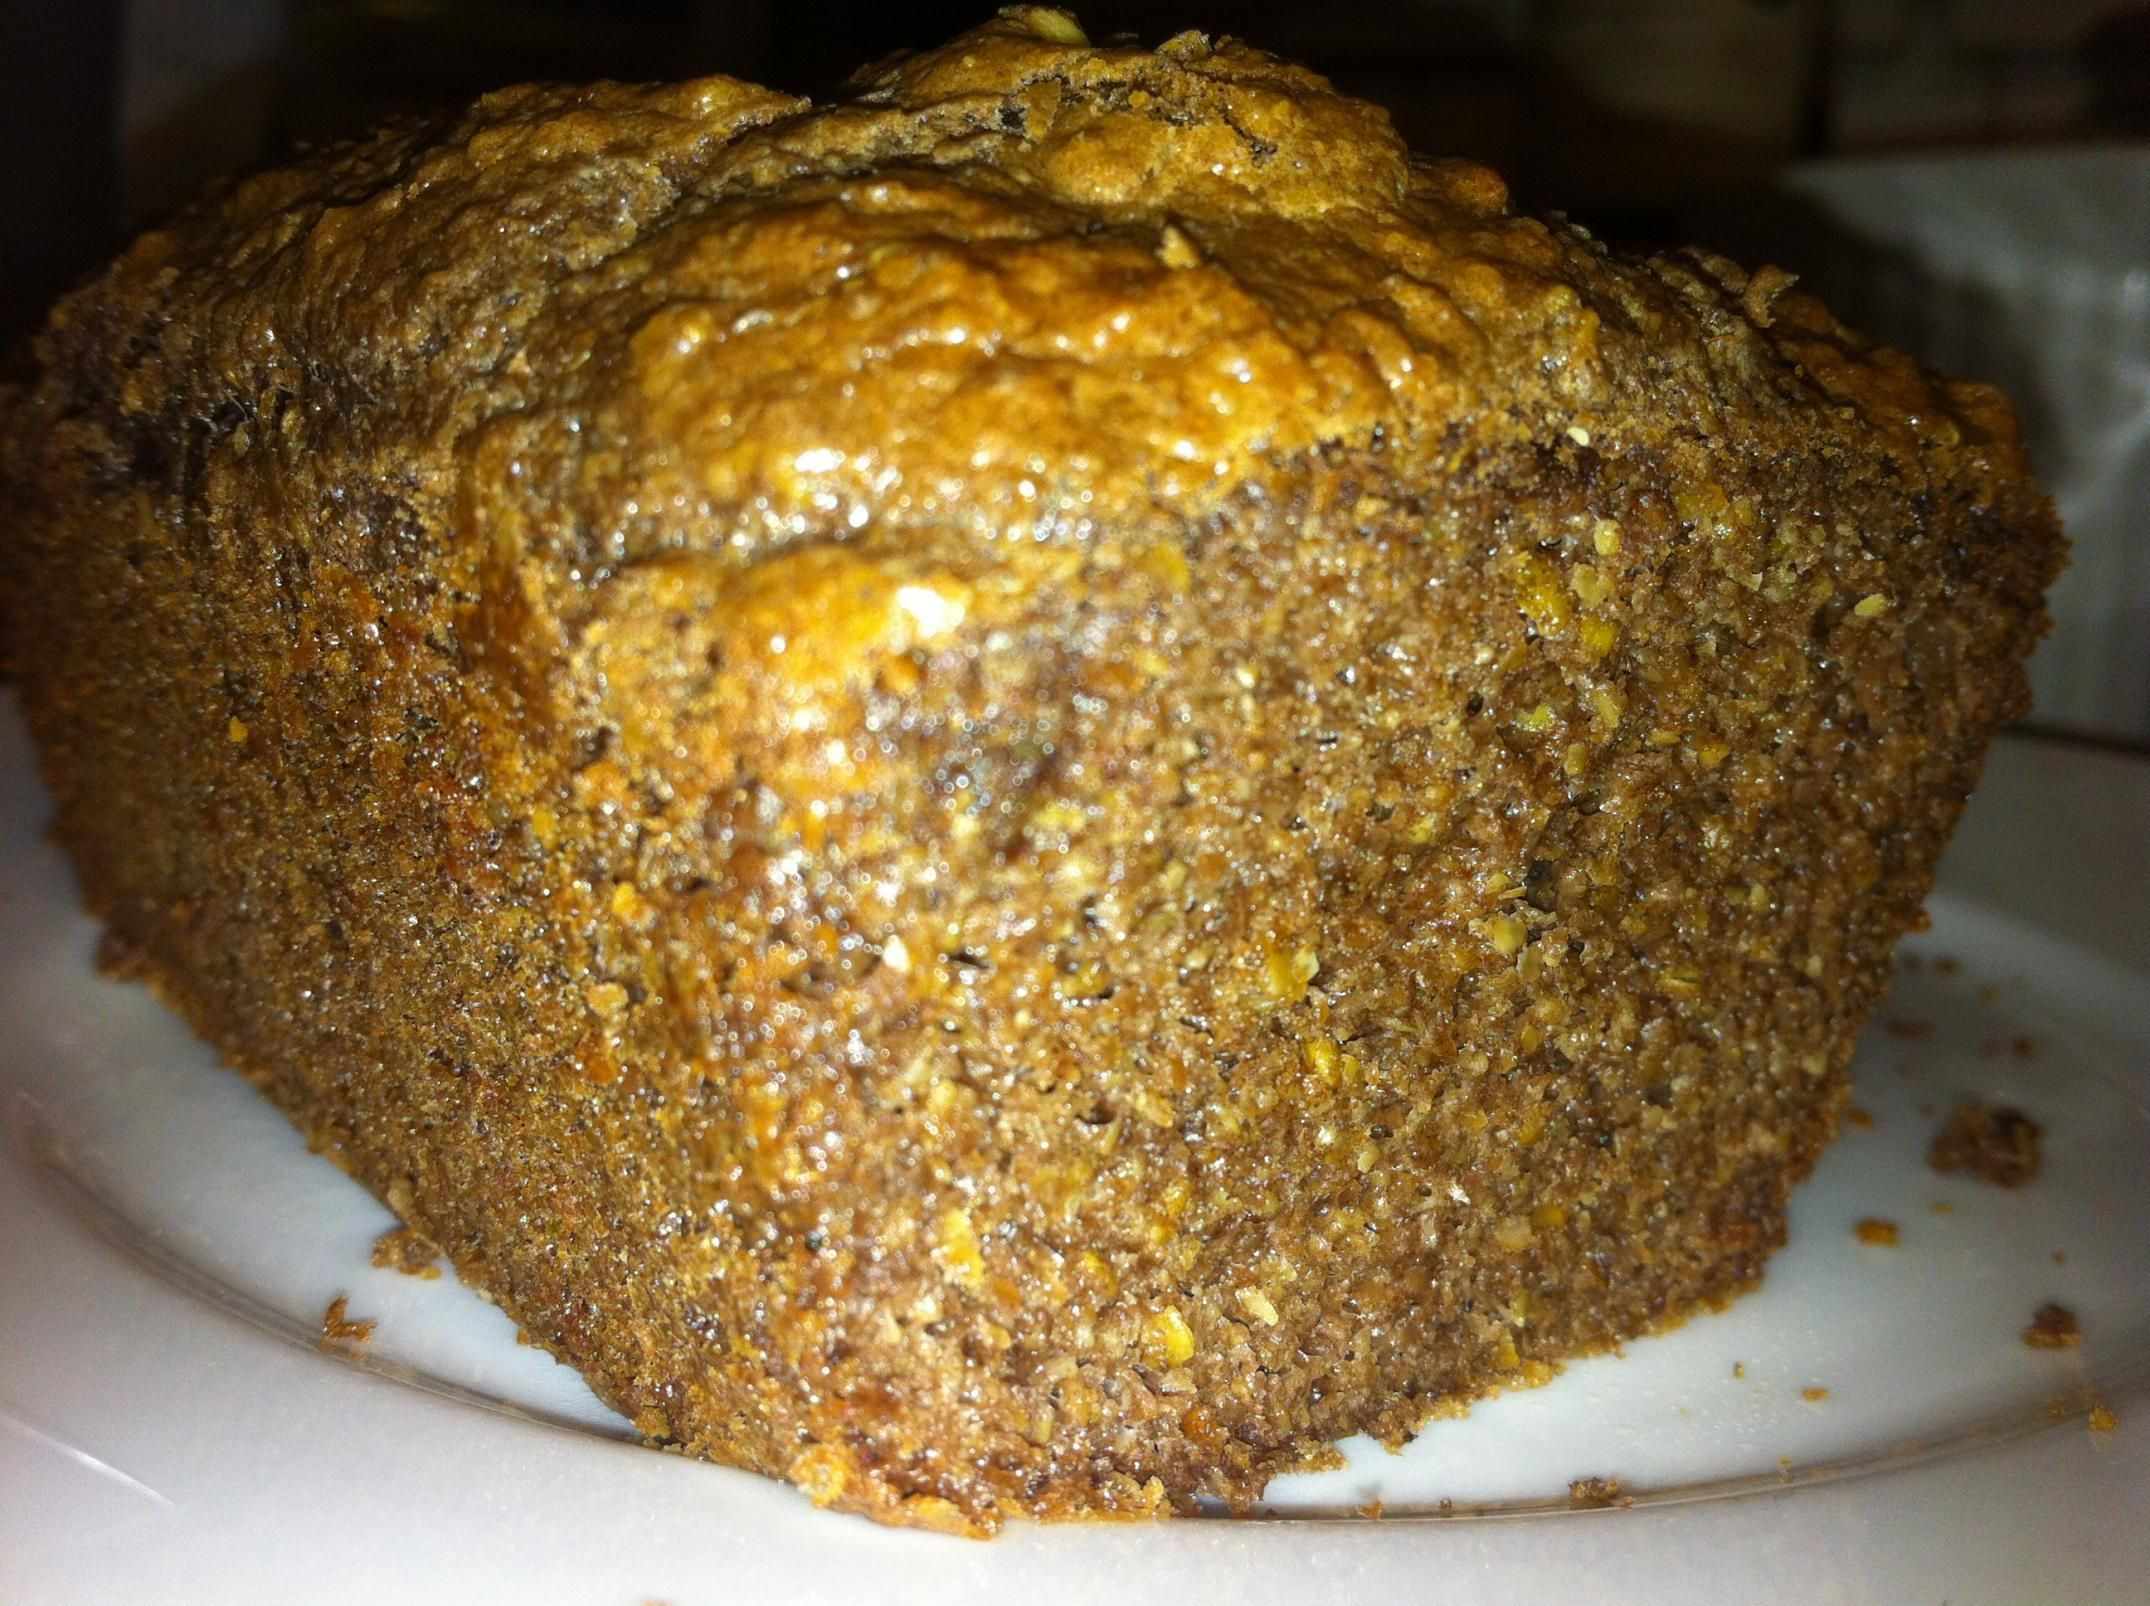 Atkins Bread Recipe
 Atkins "Muffin" recipe used to make low carb bread with